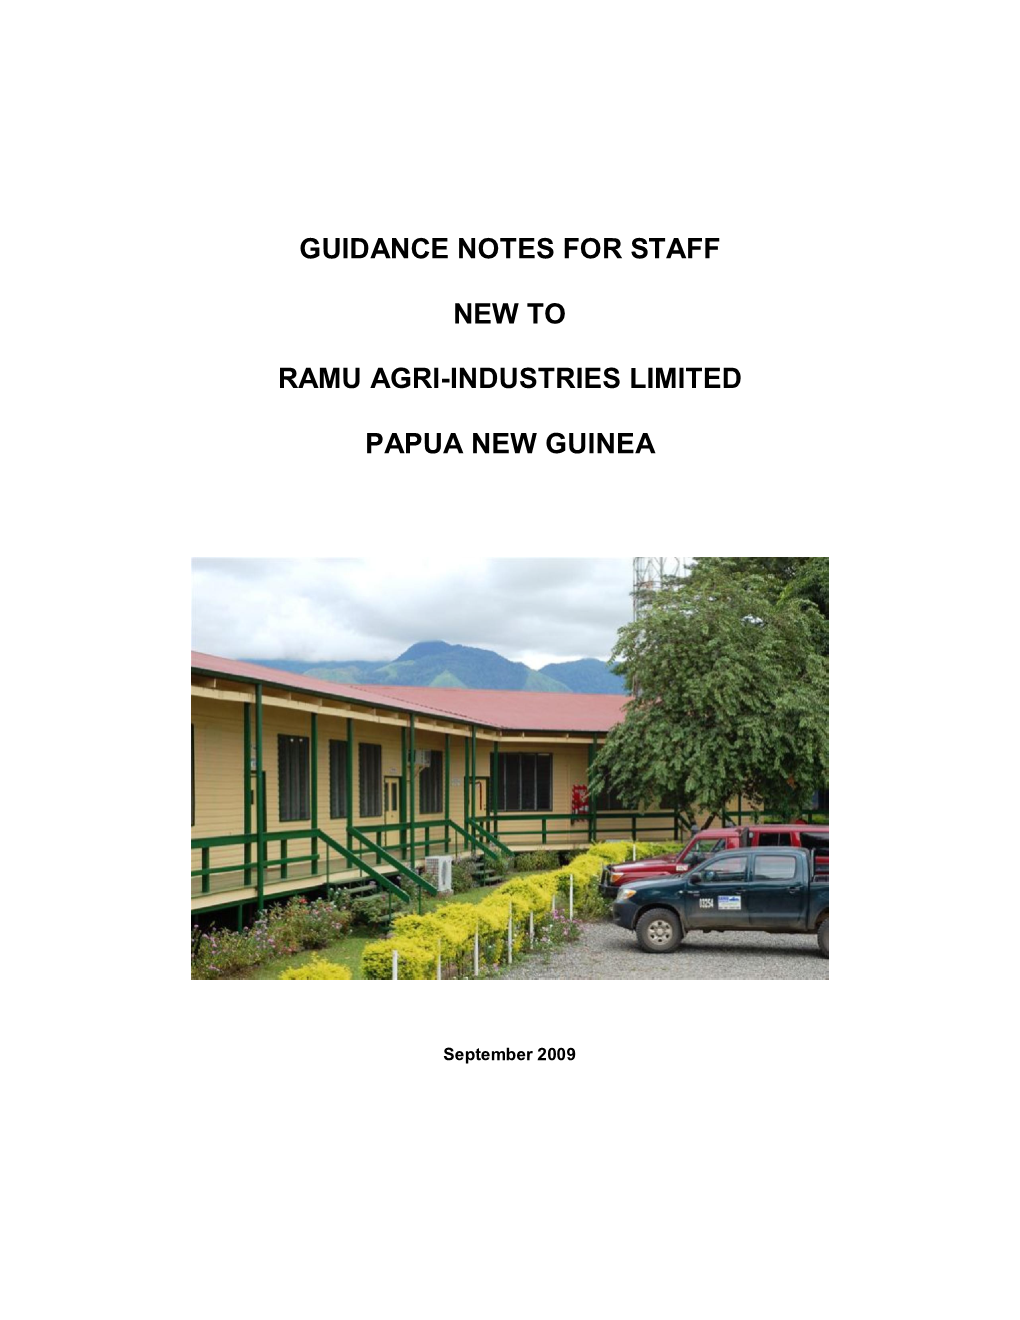 Guidance Notes for Staff New to Ramu Agri-Industries